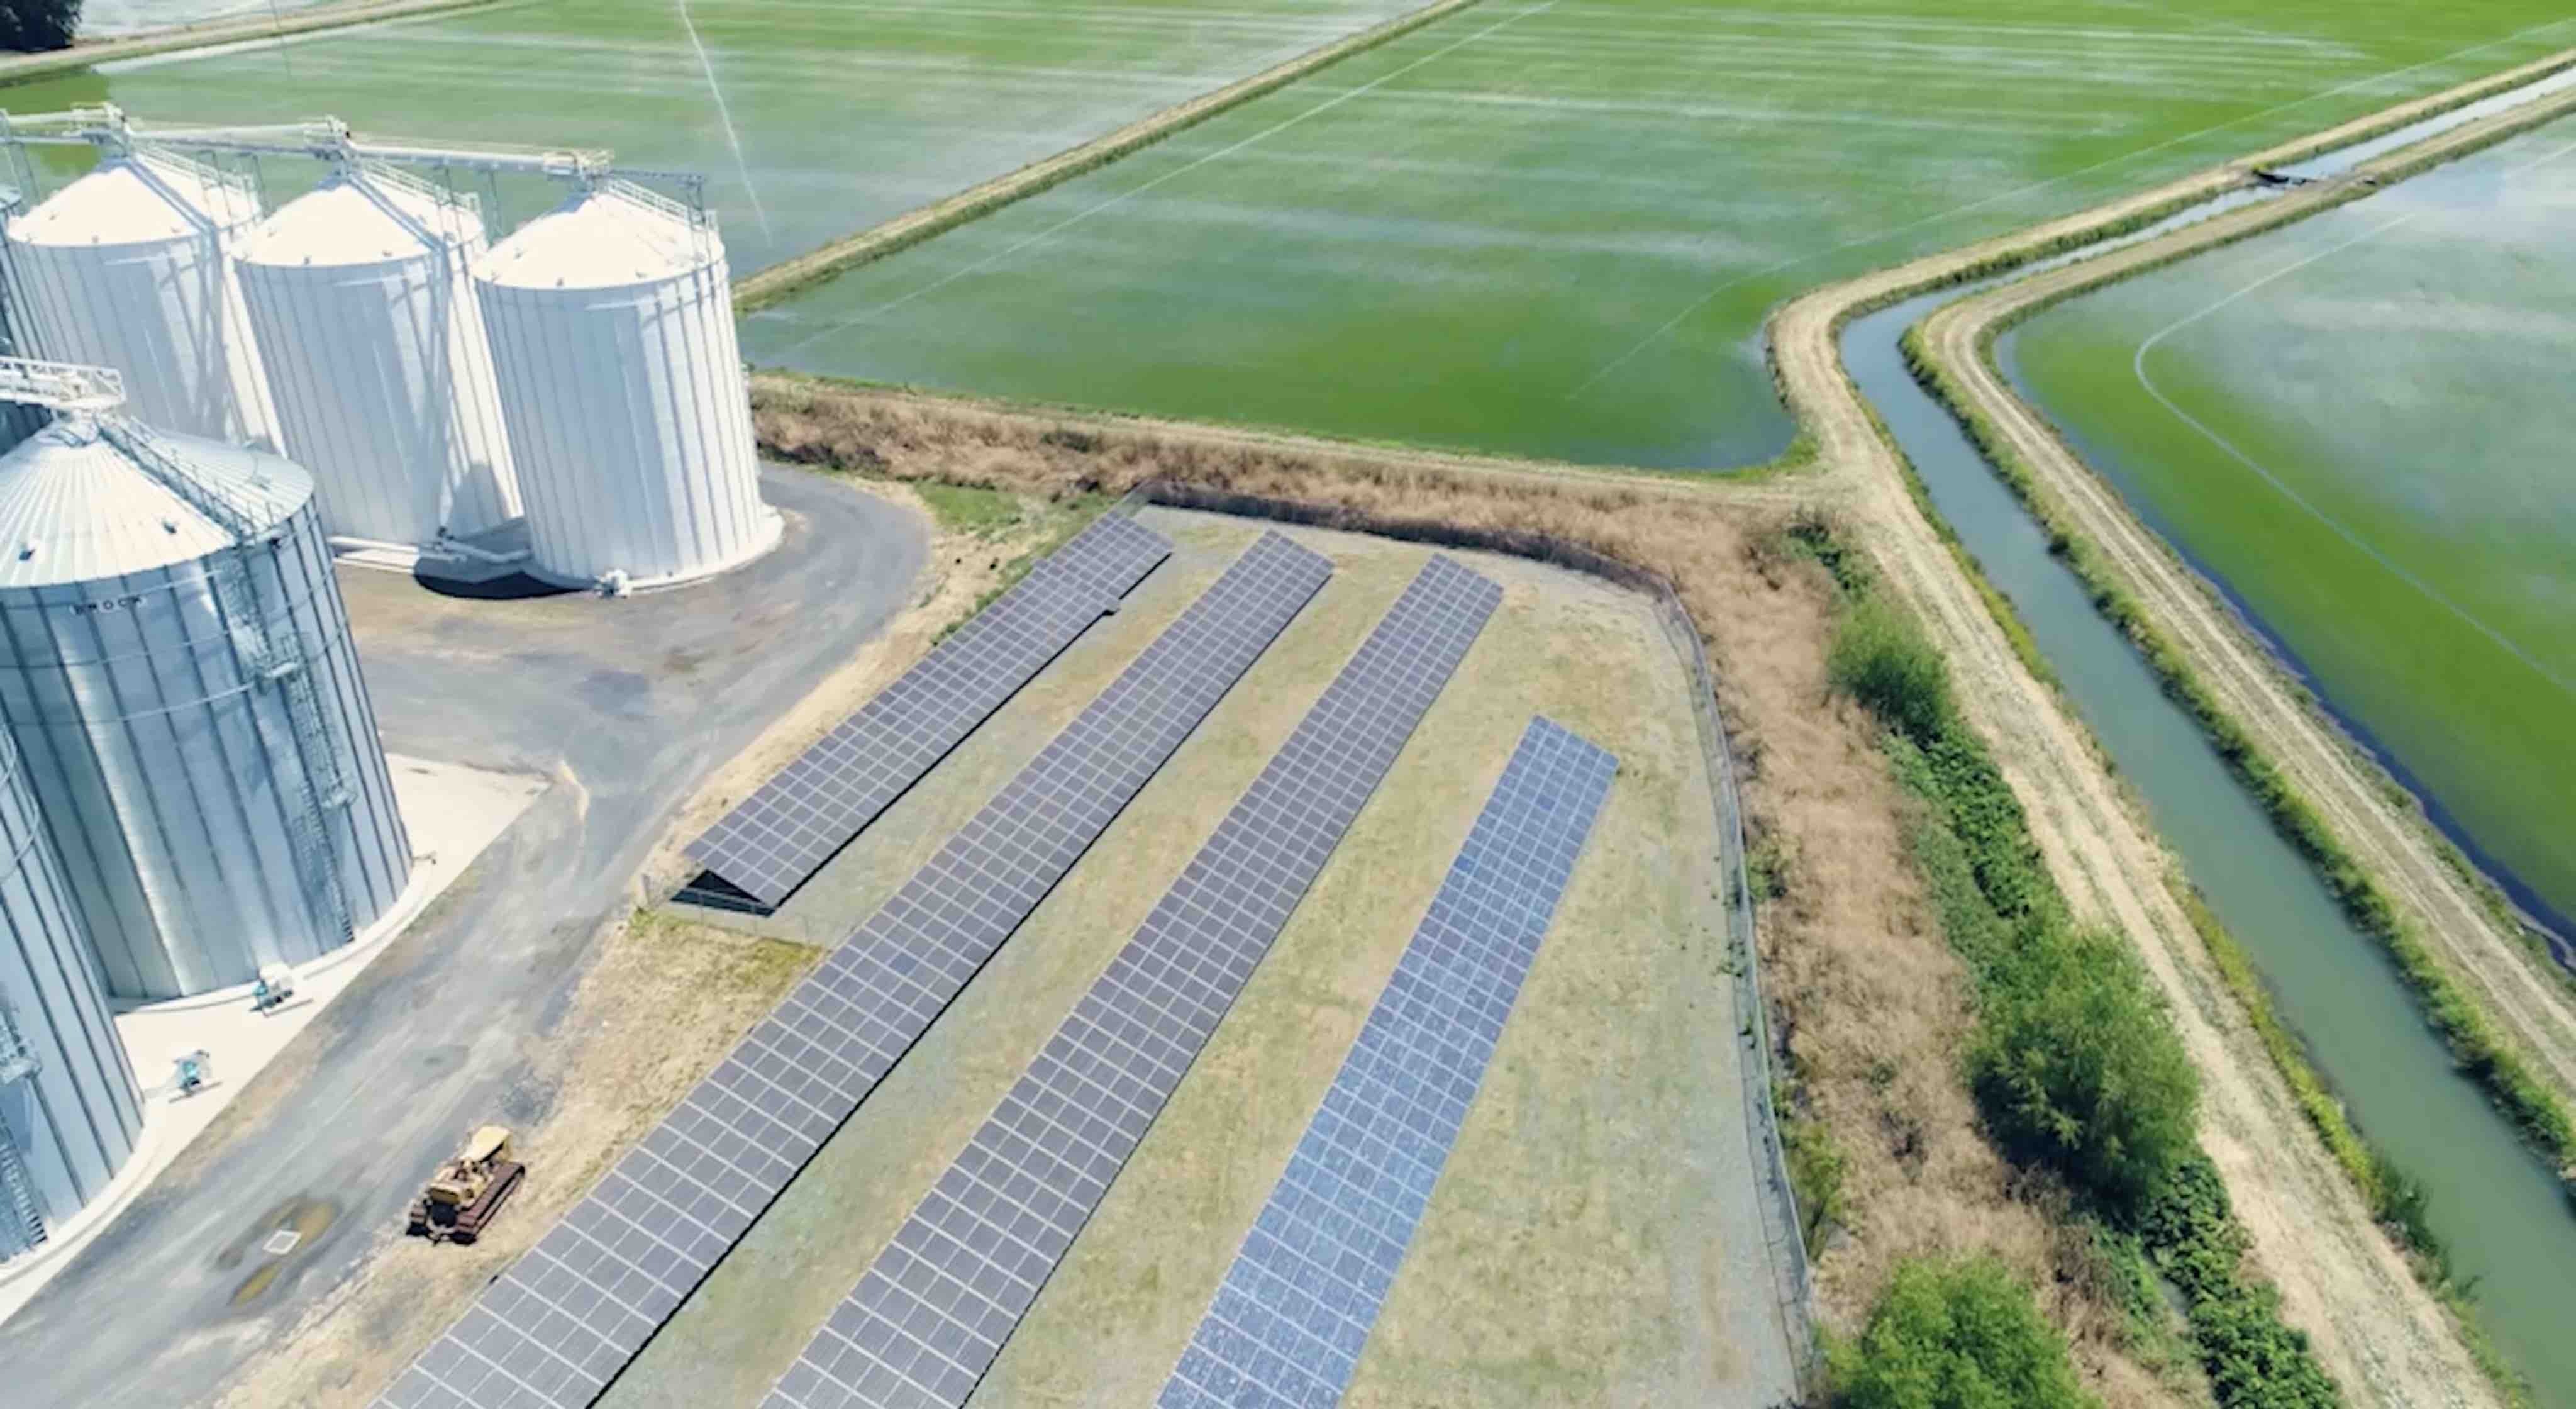 Solar panels, rice bins, and green rice fields at Lundberg Family Farms.